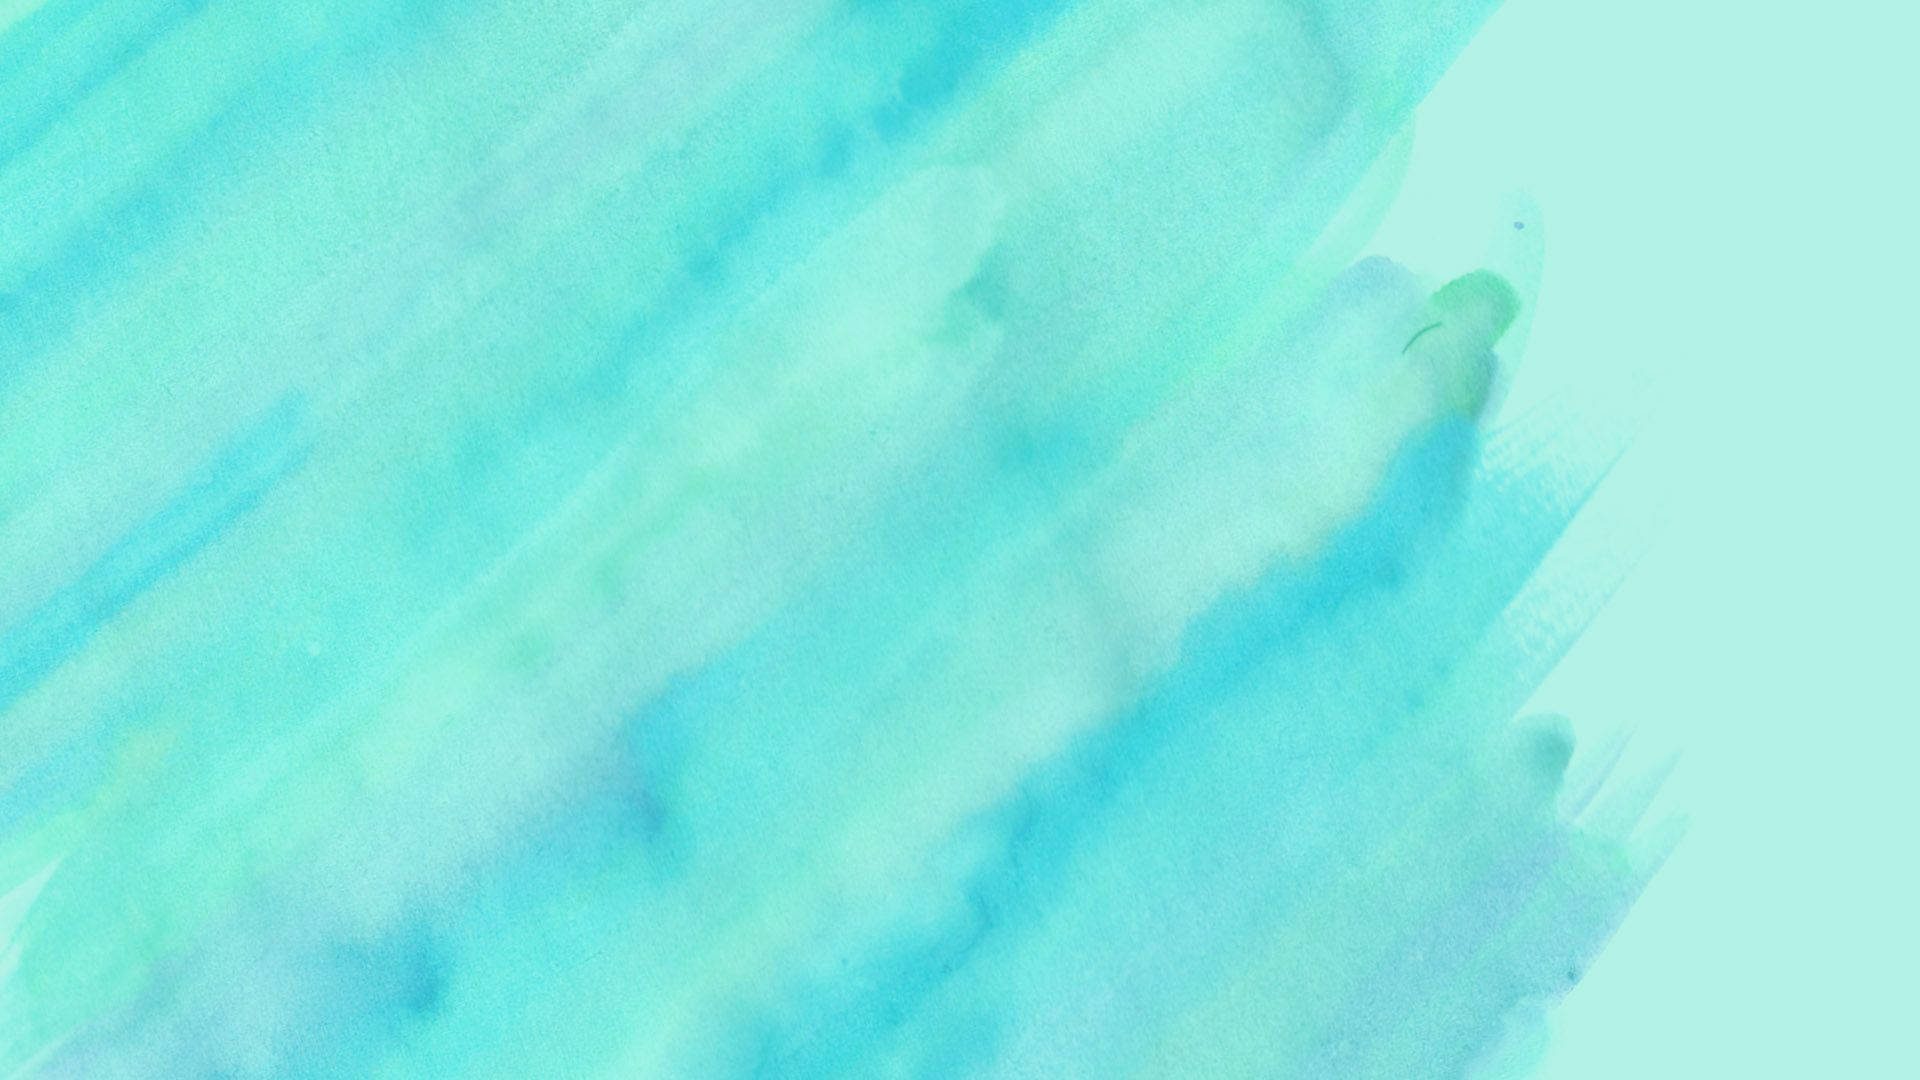 A Watercolor Background With A Blue And Green Color Wallpaper